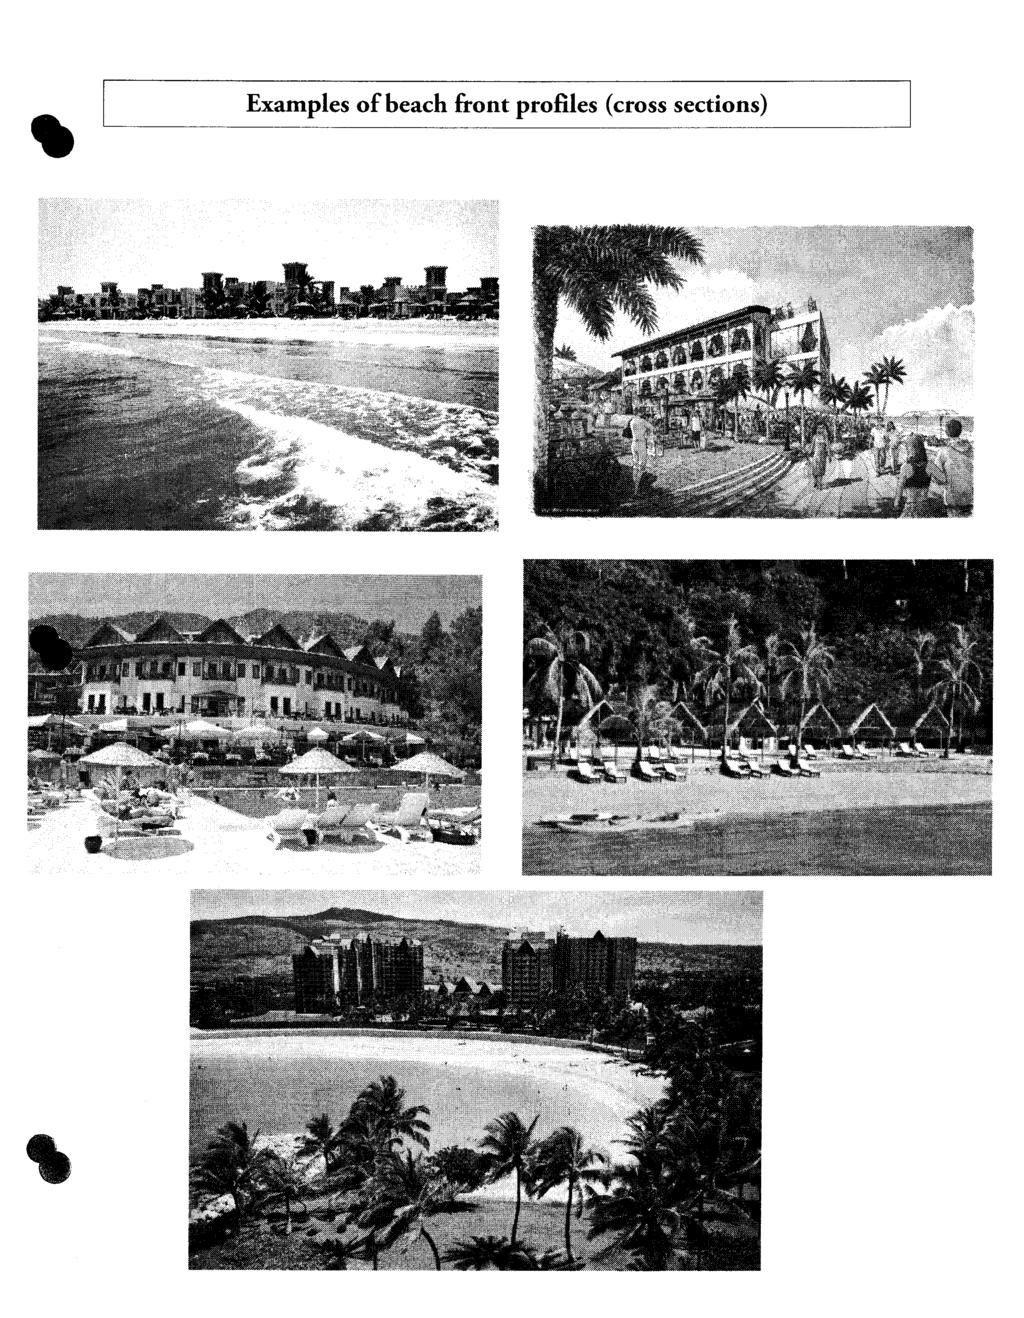 Examples of beach front